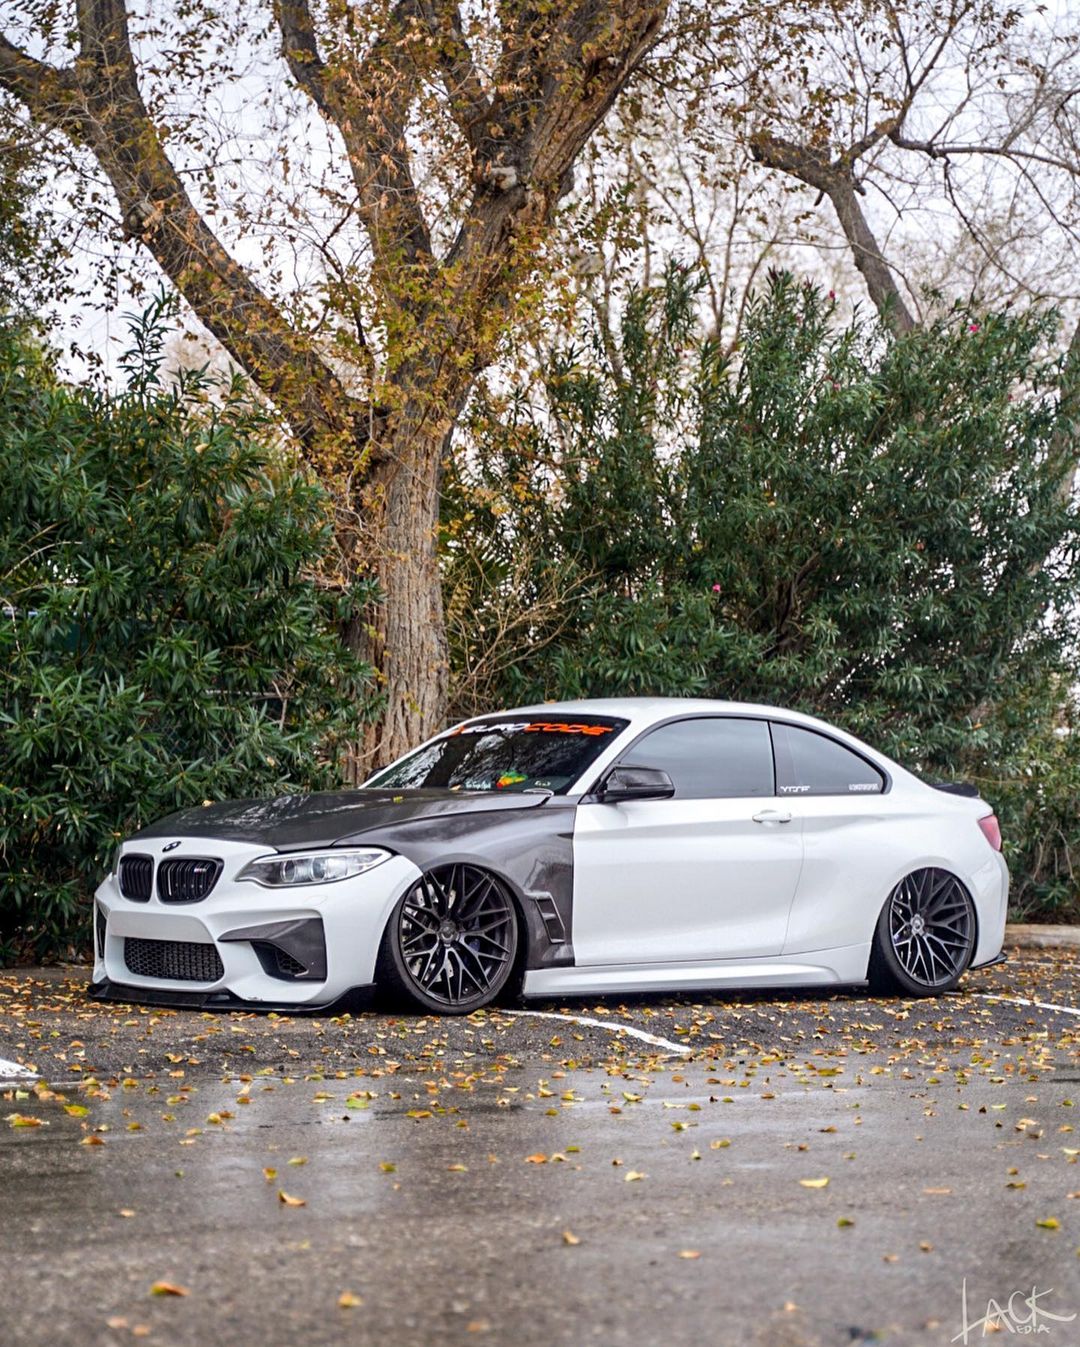 Check our price and buy CMST Carbon Fiber Body Kit set for BMW M2 / M2C!